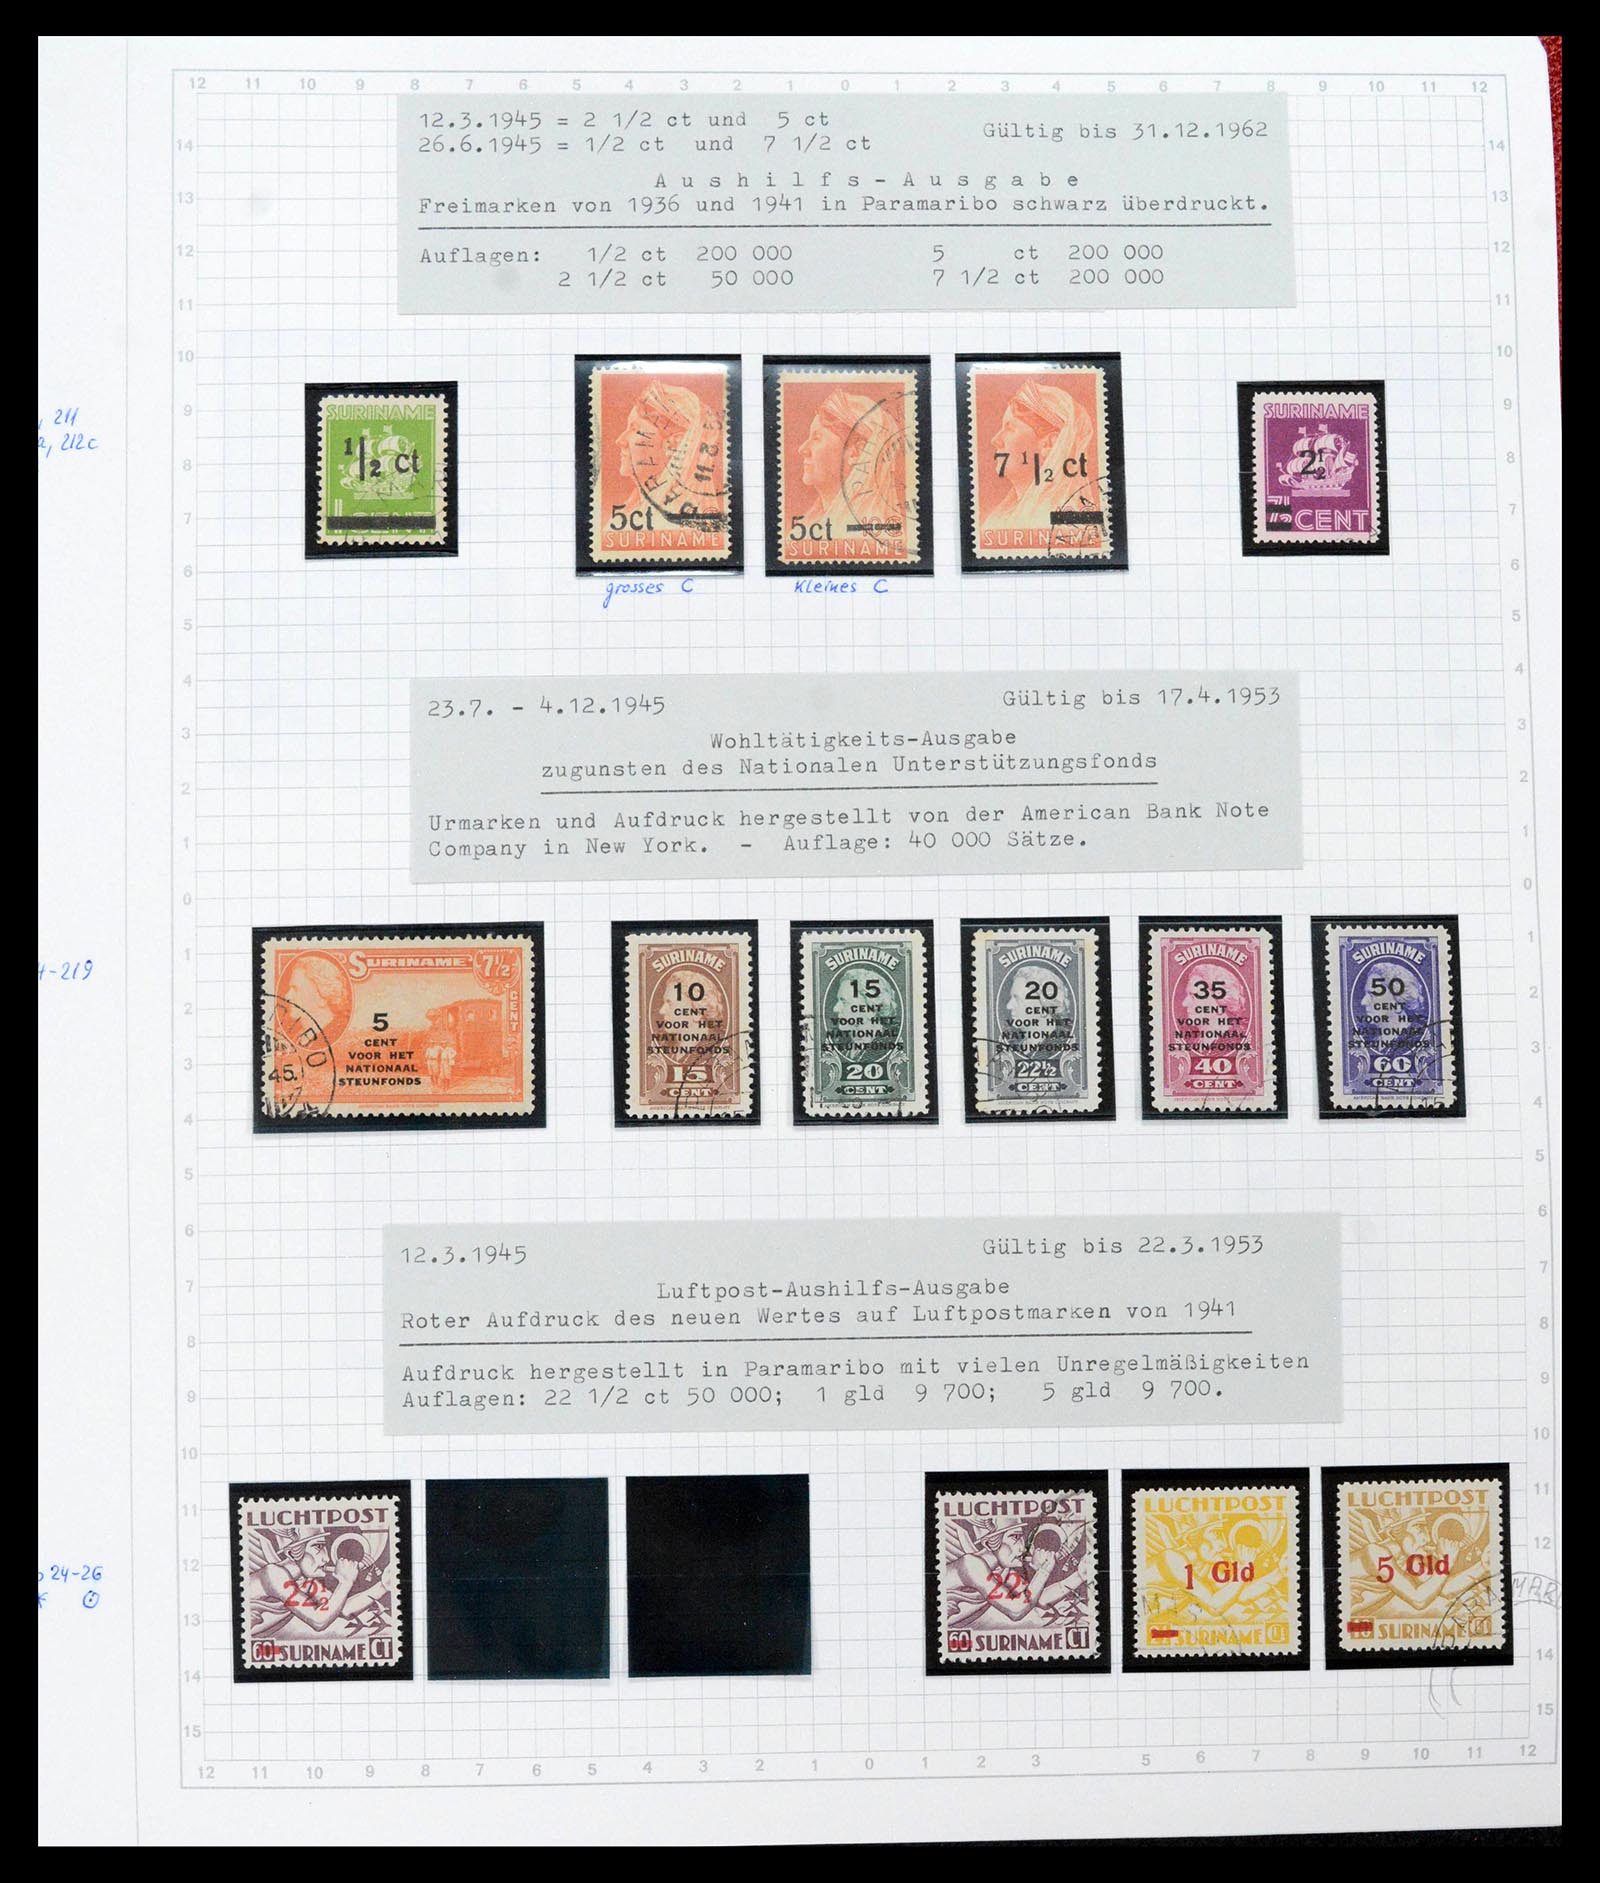 39373 0025 - Stamp collection 39373 Suriname 1873-1975.